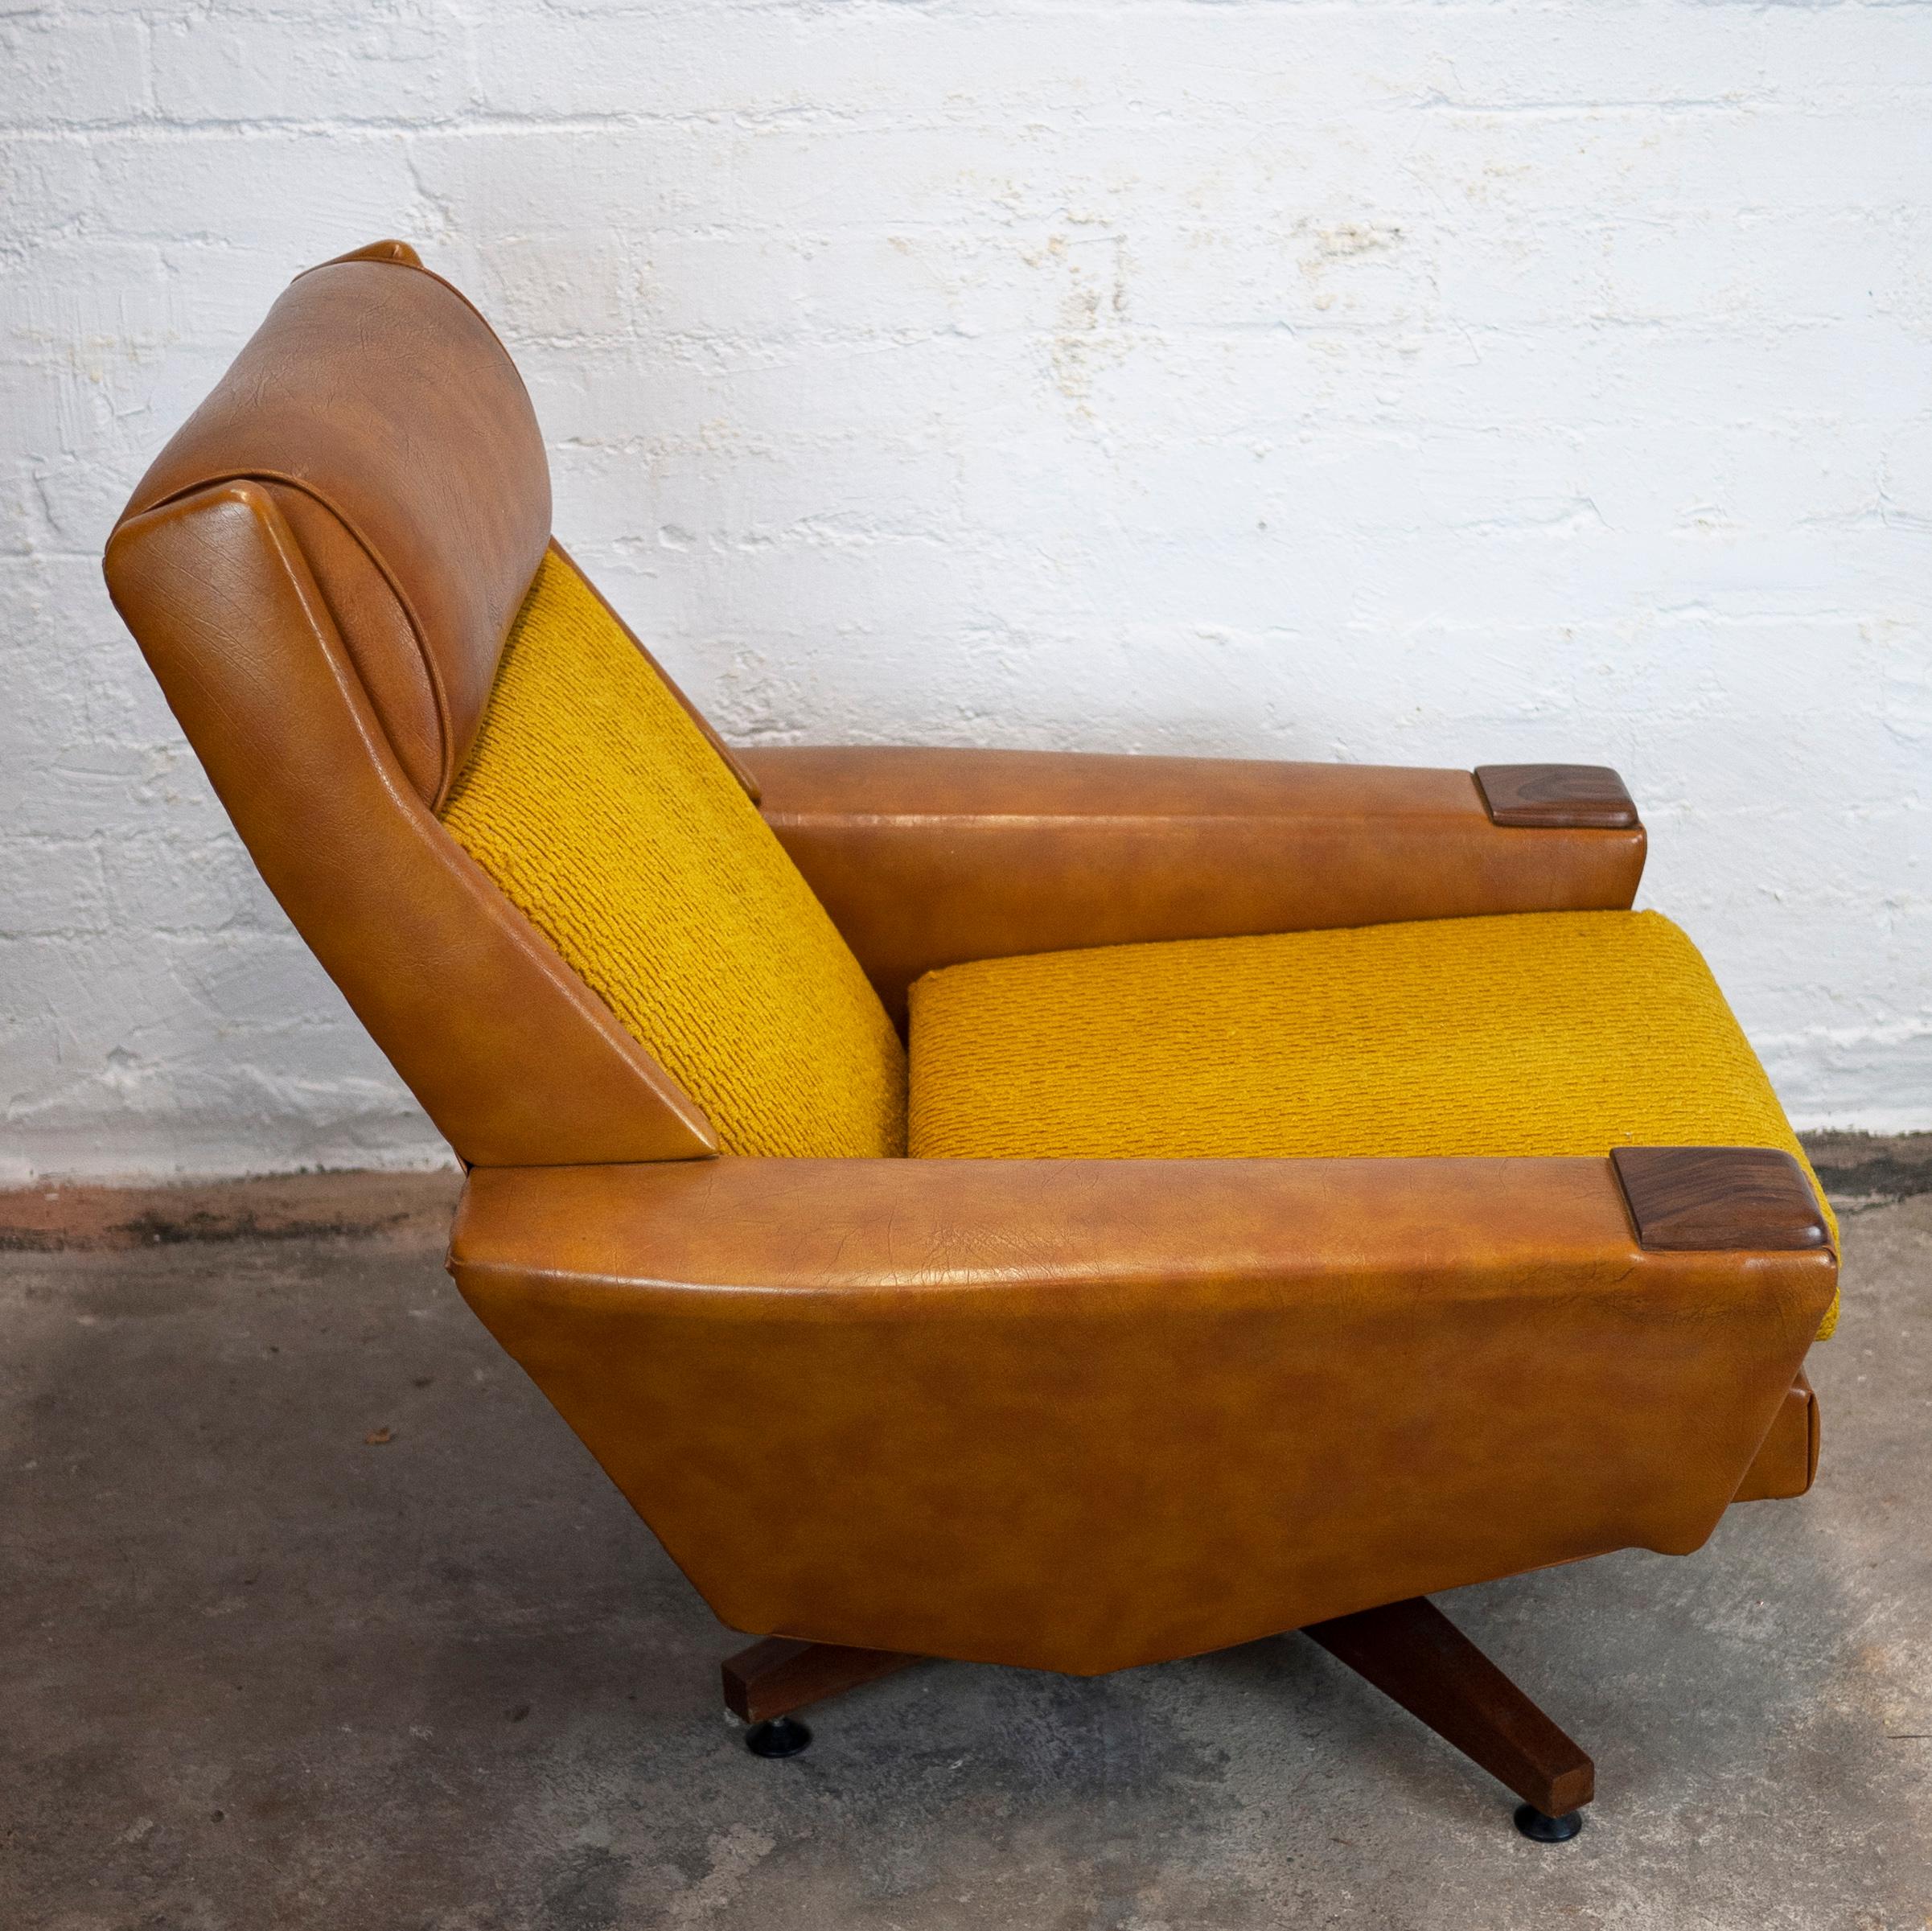 A brown leather and textured mustard fabric 1970s armchair with springs.

Manufacturer - Unknown

Design Period - 1970 to 1979

Style - Vintage, Mid-Century

Detailed Condition - Good

Restoration and Damage Details - Fabric is original so